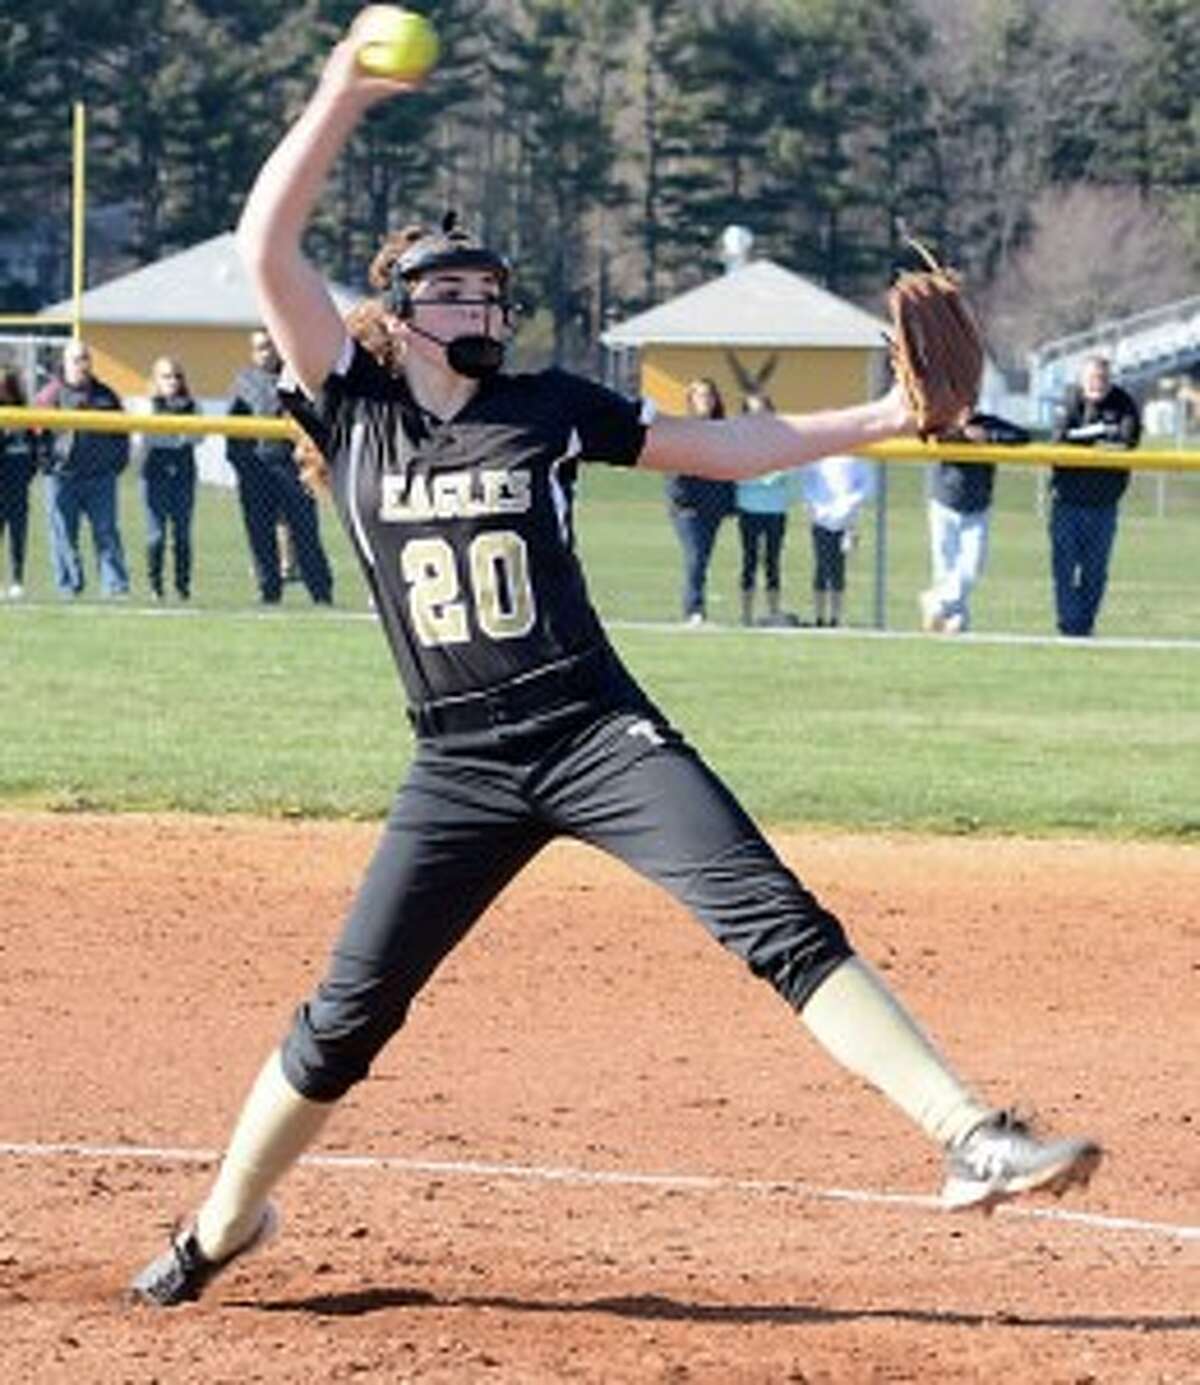 Ally Szabo struck out 12 batters in five innings of work.